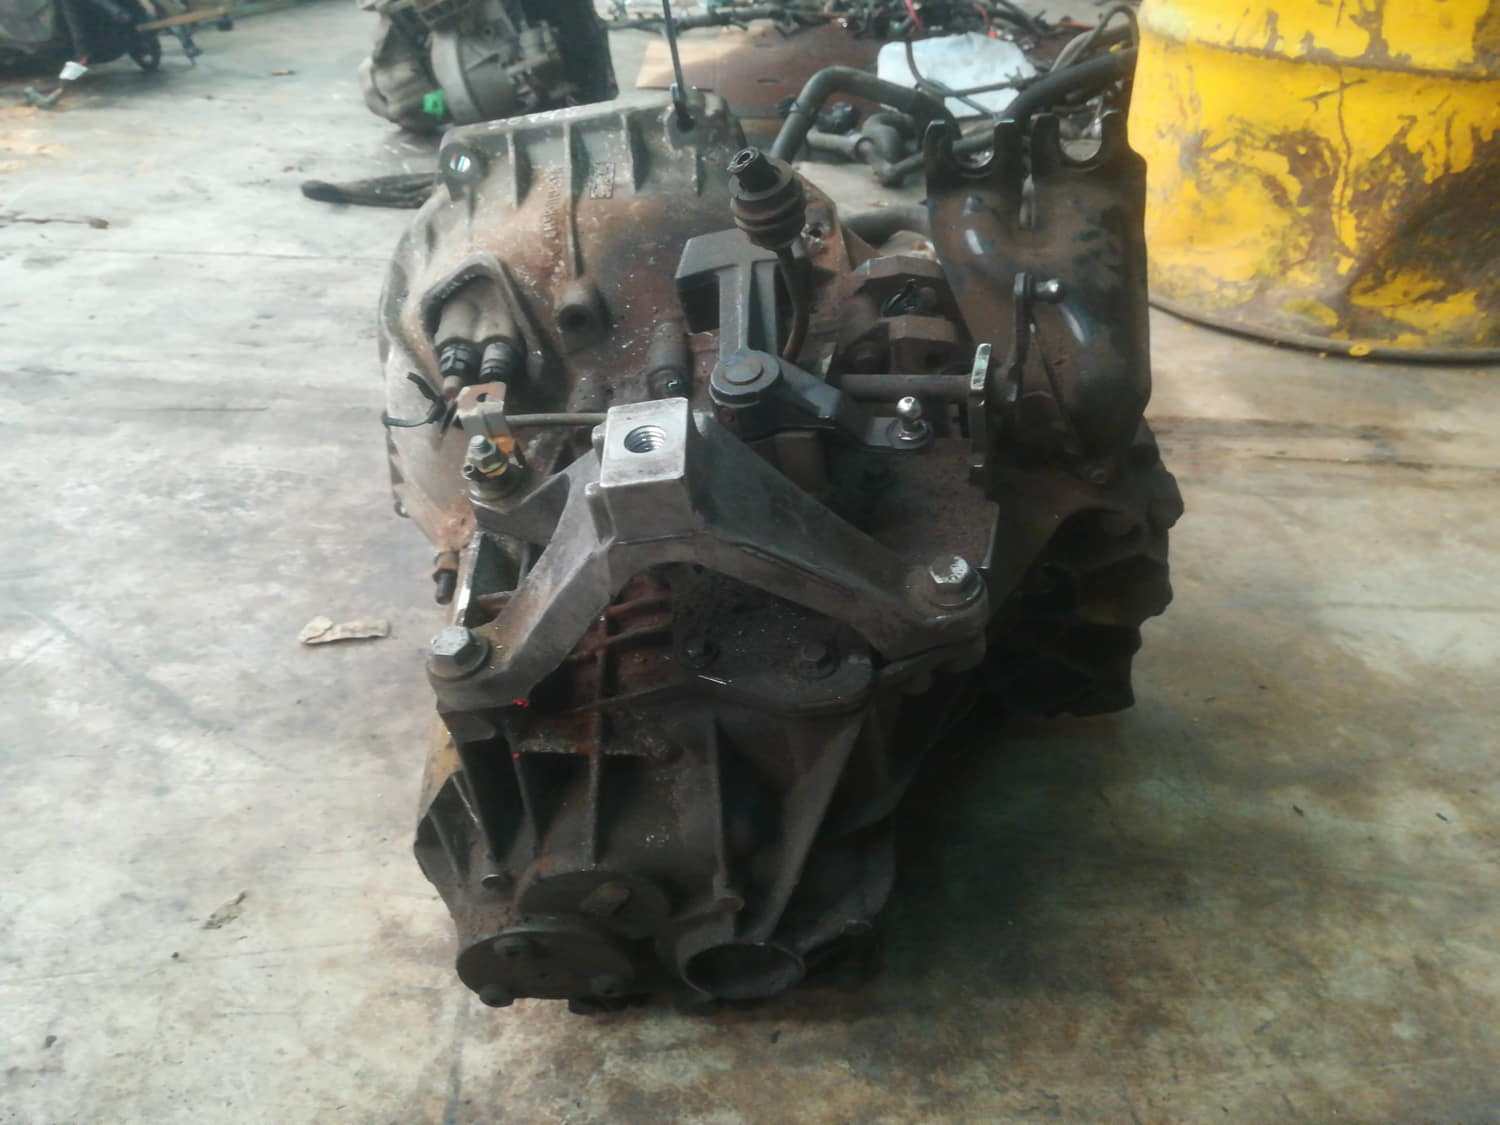 FORD Focus 2 generation (2004-2011) Gearbox 6M5R7002ZB 24795255